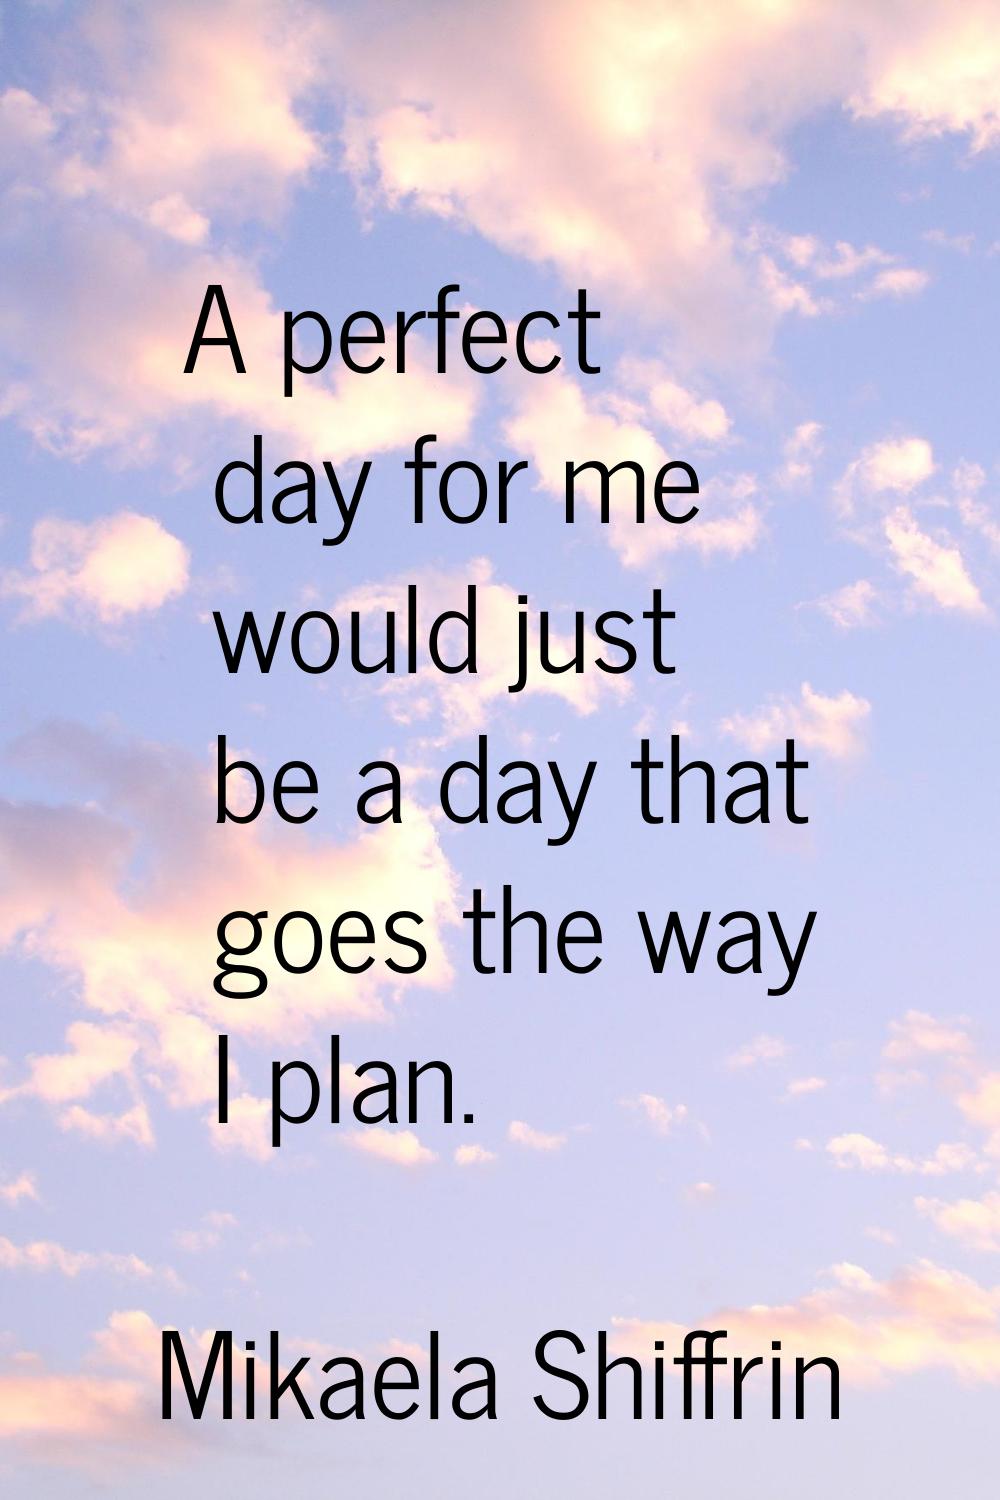 A perfect day for me would just be a day that goes the way I plan.